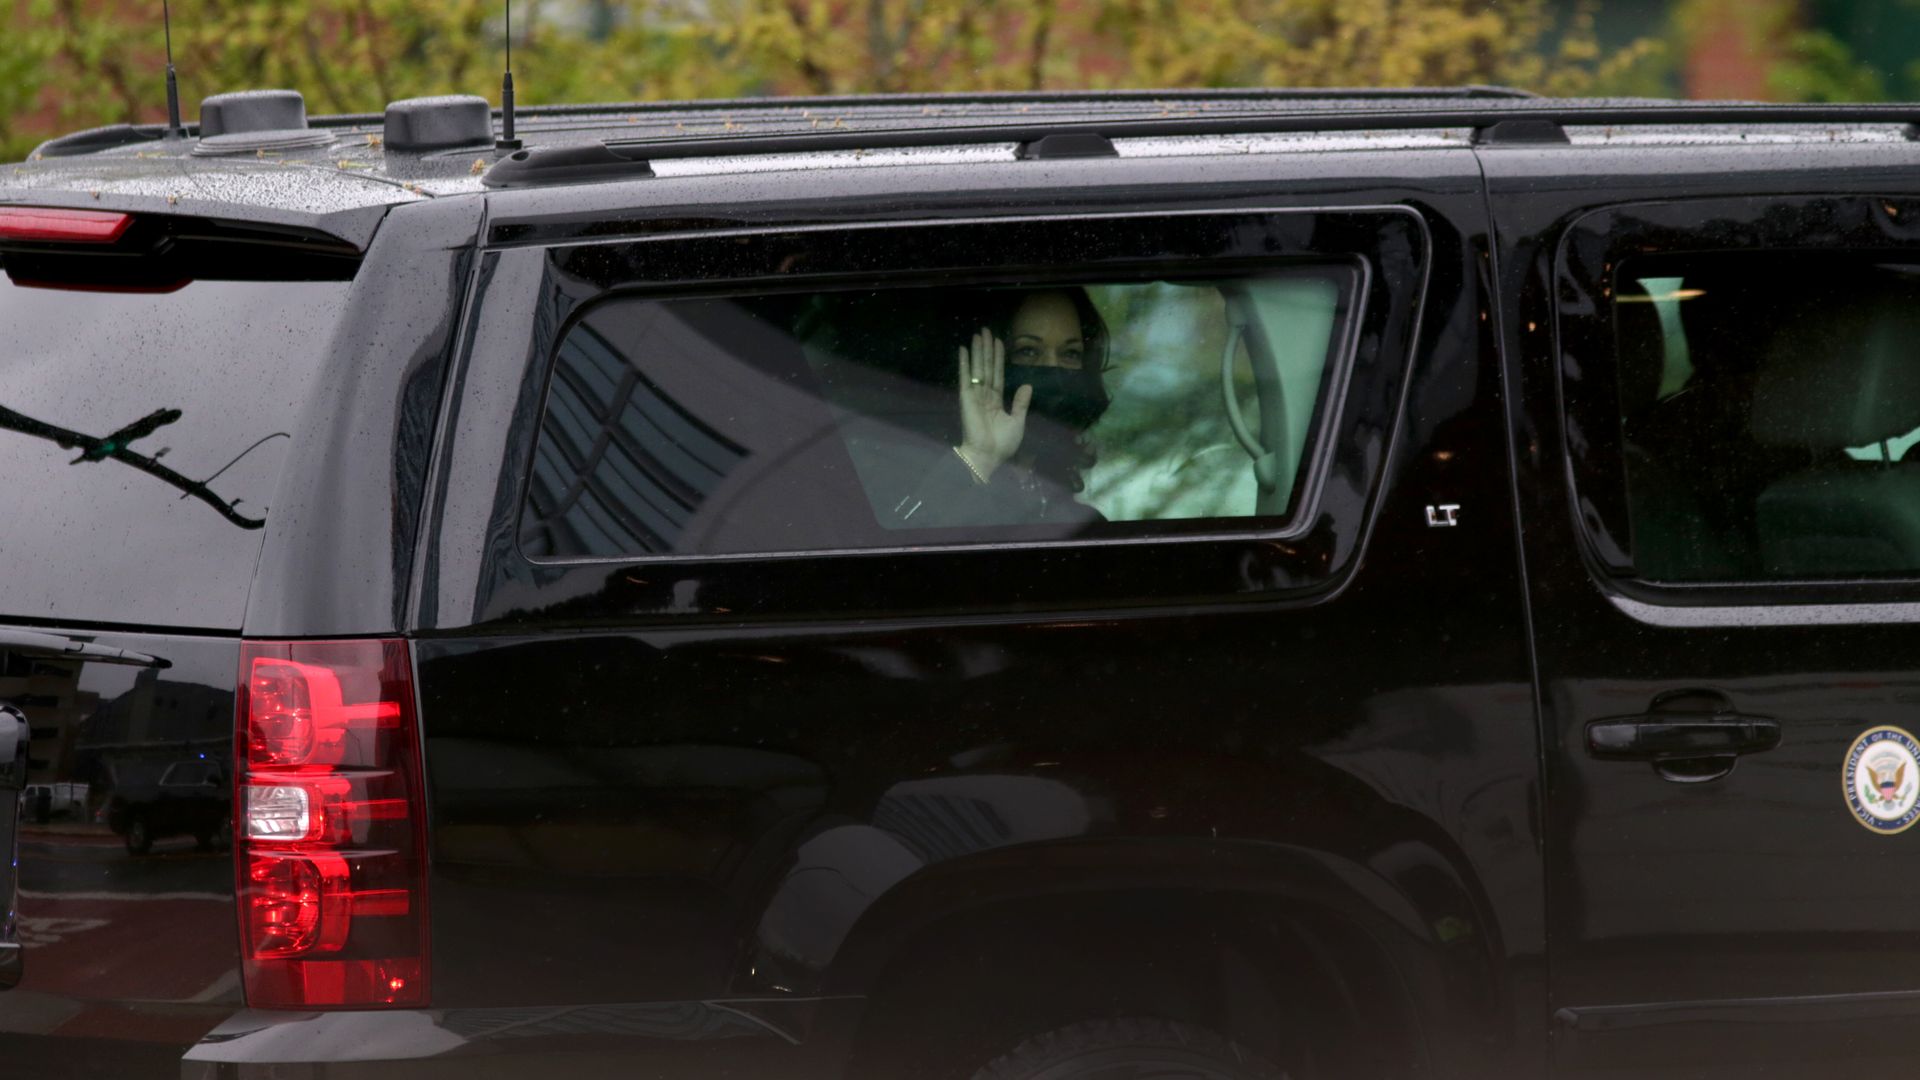 Vice President Kamala Harris is seen waving from her limousine during a visit to Rhode Island.